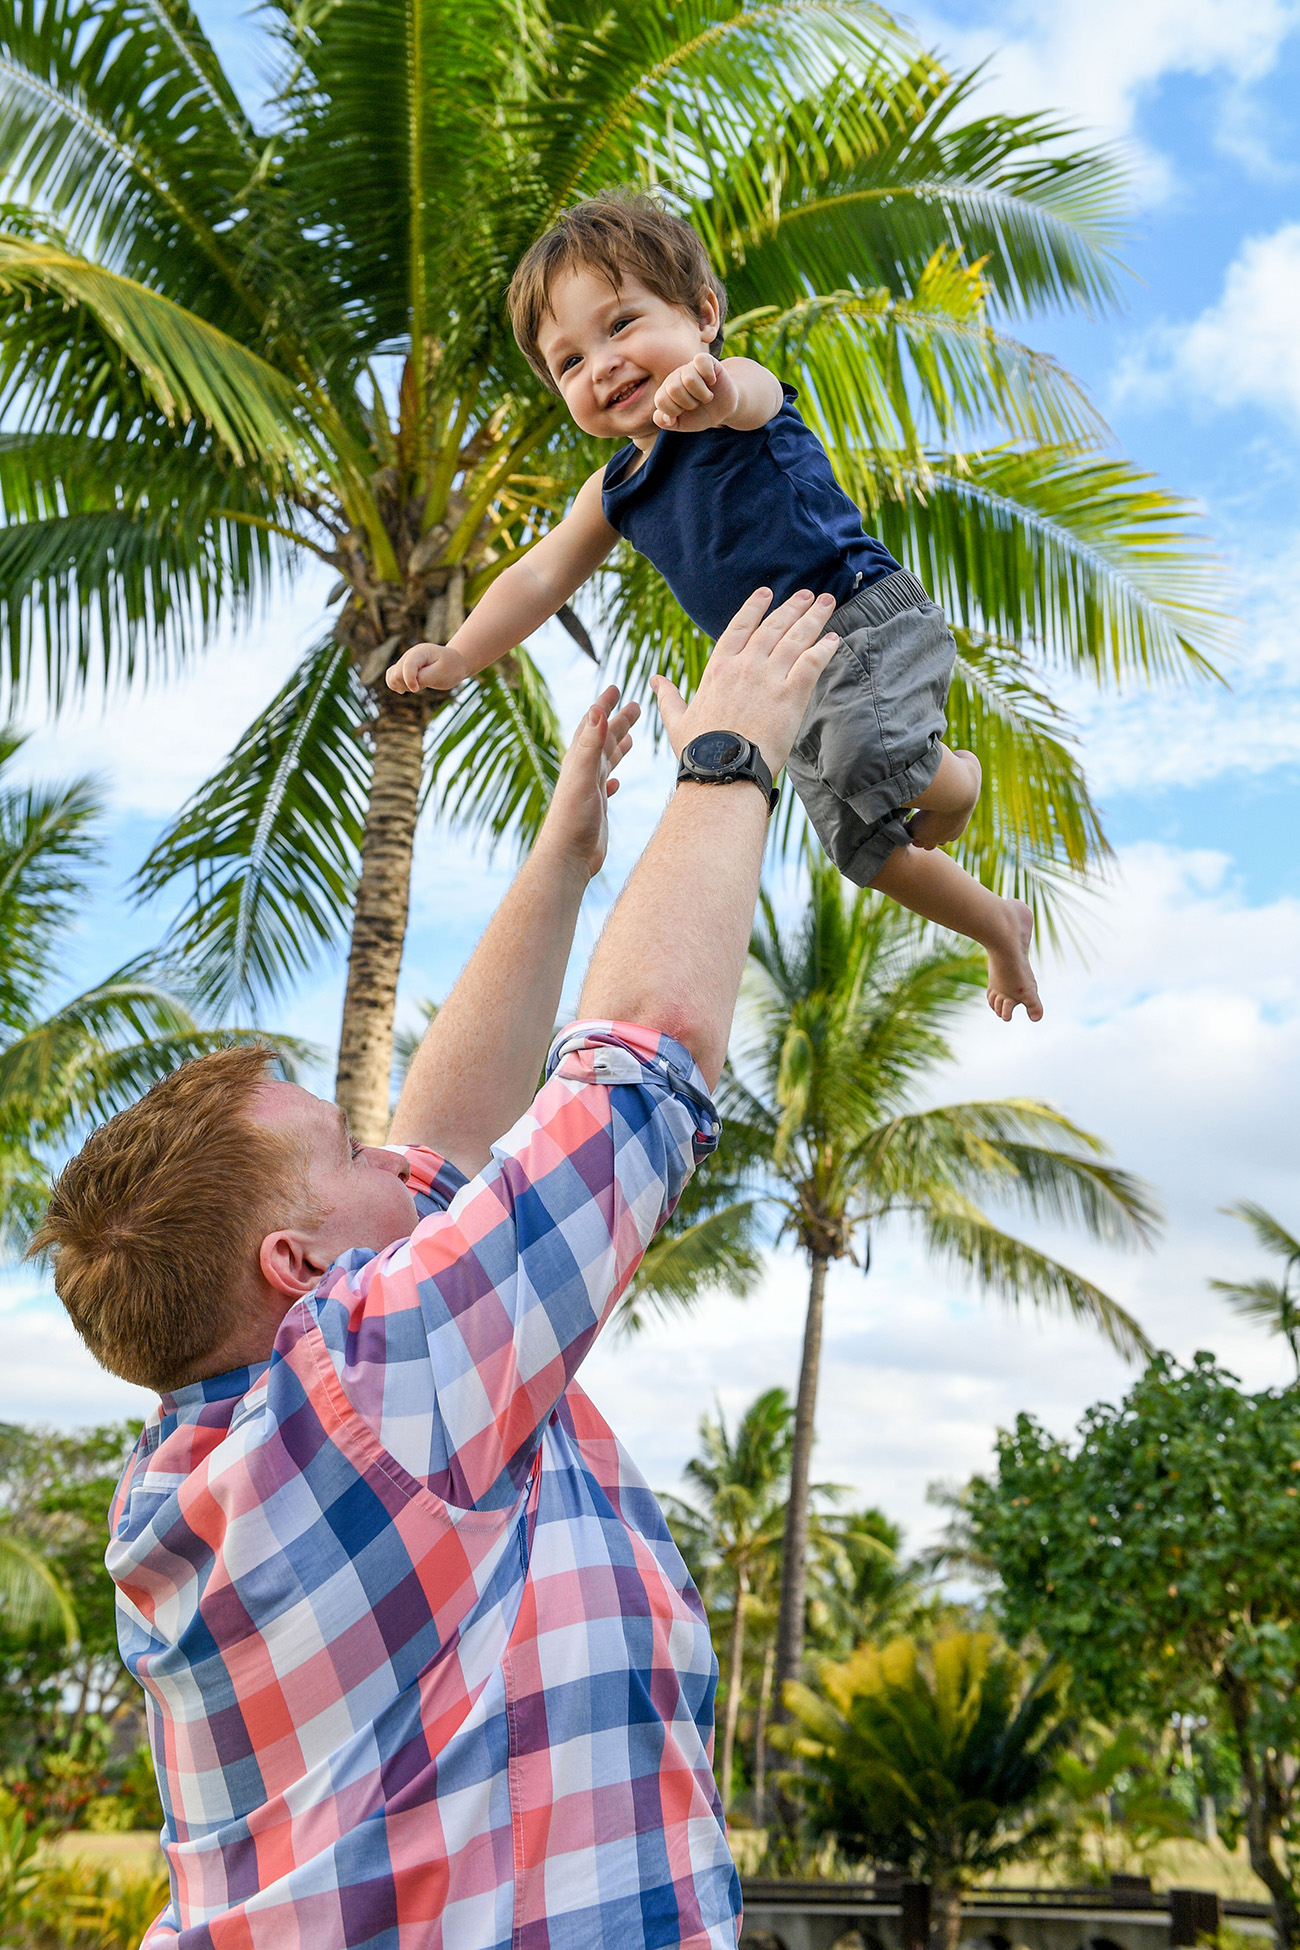 The baby is tossed up in the air against palm trees in Fiji